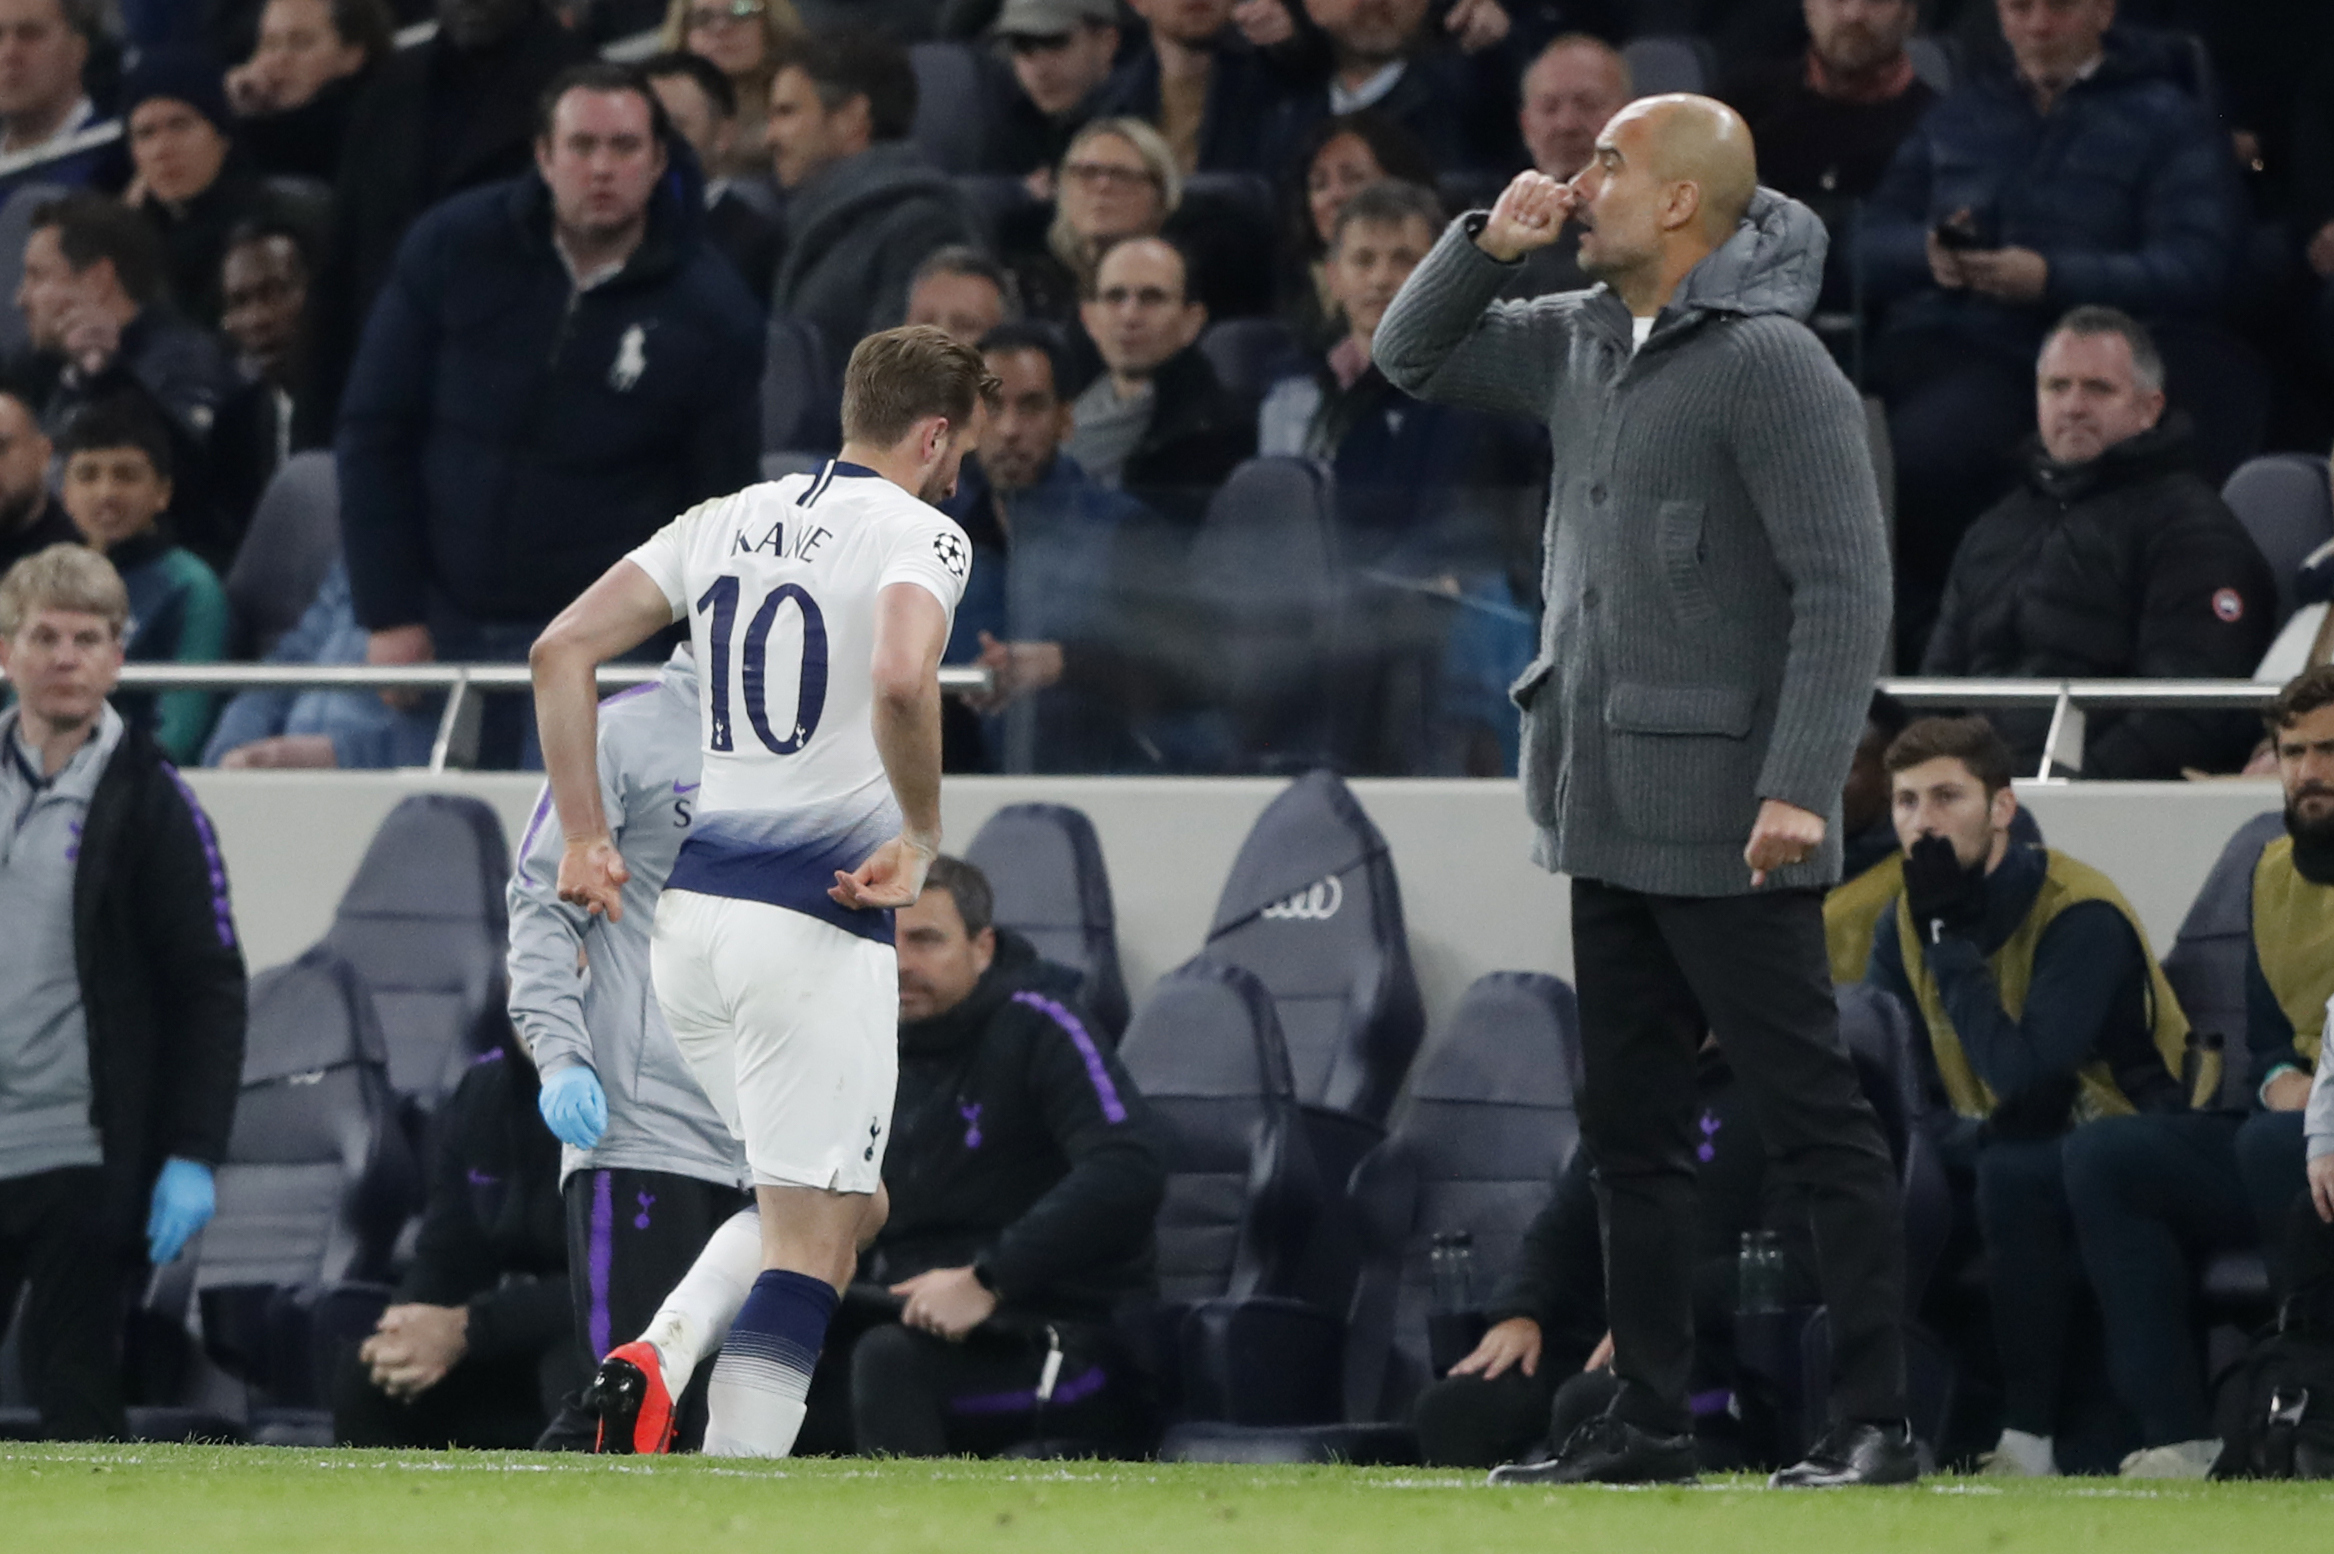 Tottenham's Harry Kane leaves the pitch after picking up an injury against Manchester City in the Champions League